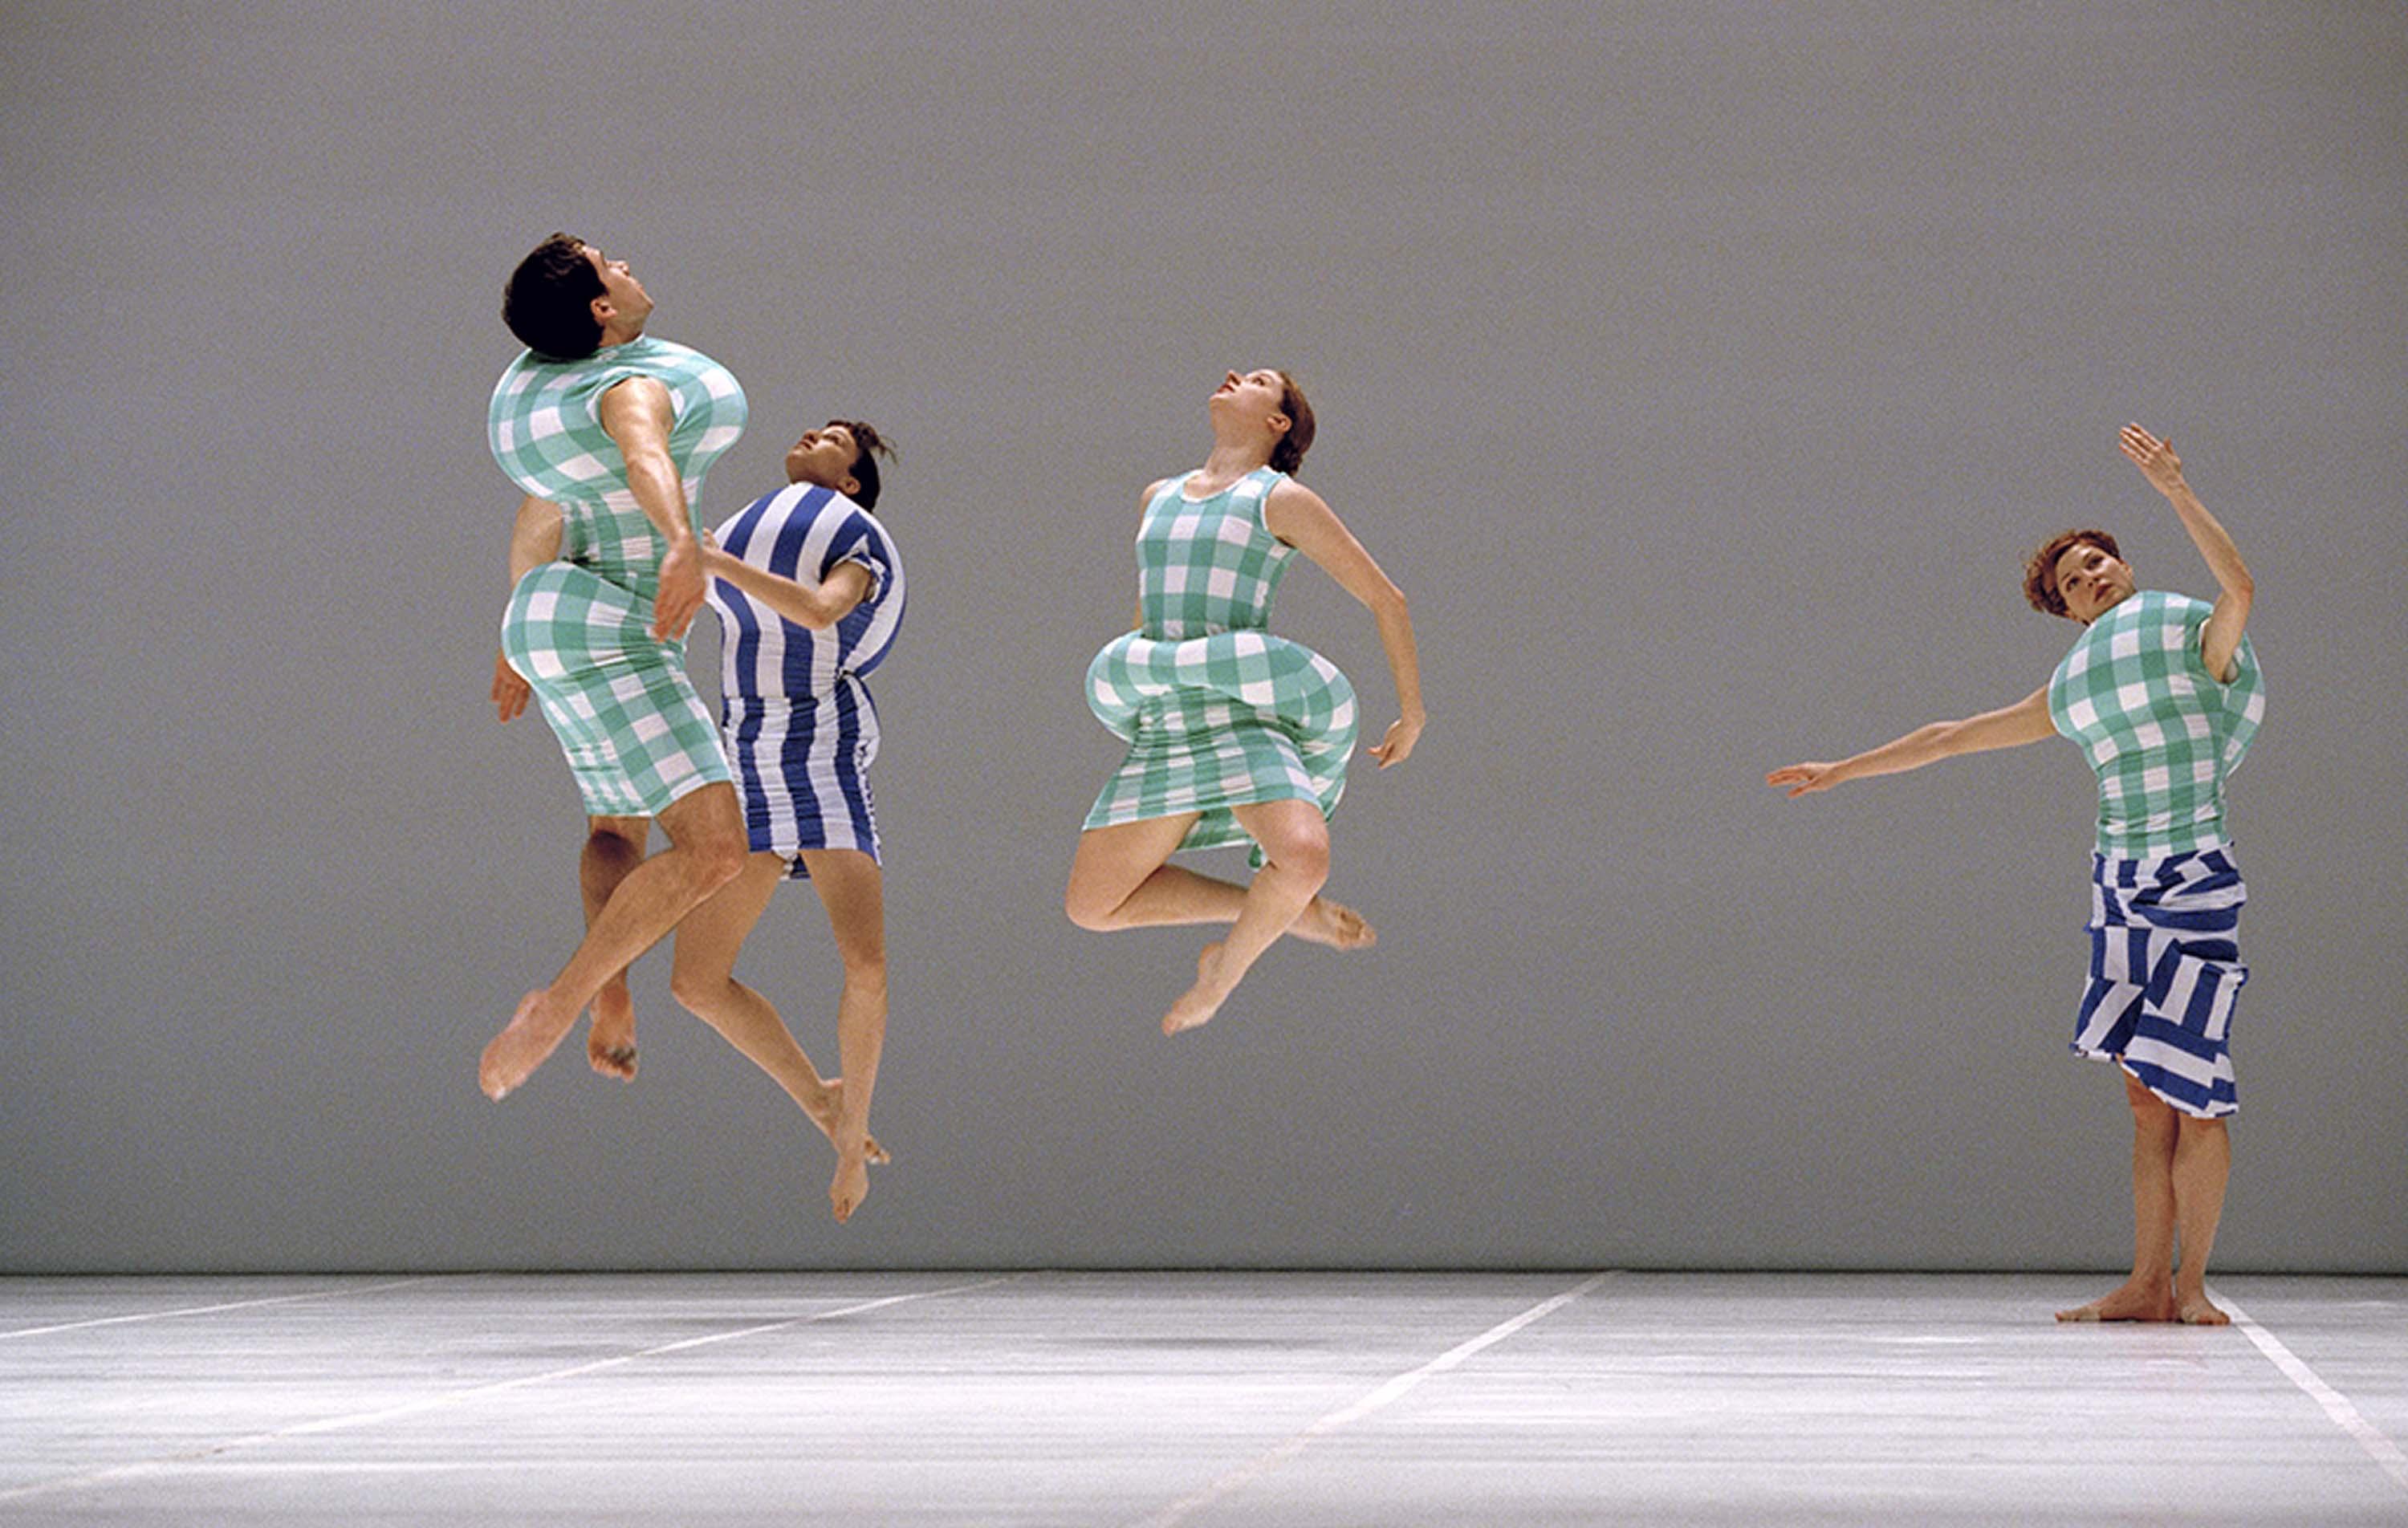 Three dancers leap in the air while looking up, while a fourth dancer, frozen in a robotic gesticulation, stands to the right against a grey backdrop. They wear padded costumes in bright blue-and-white stripes or green-and-white checks.